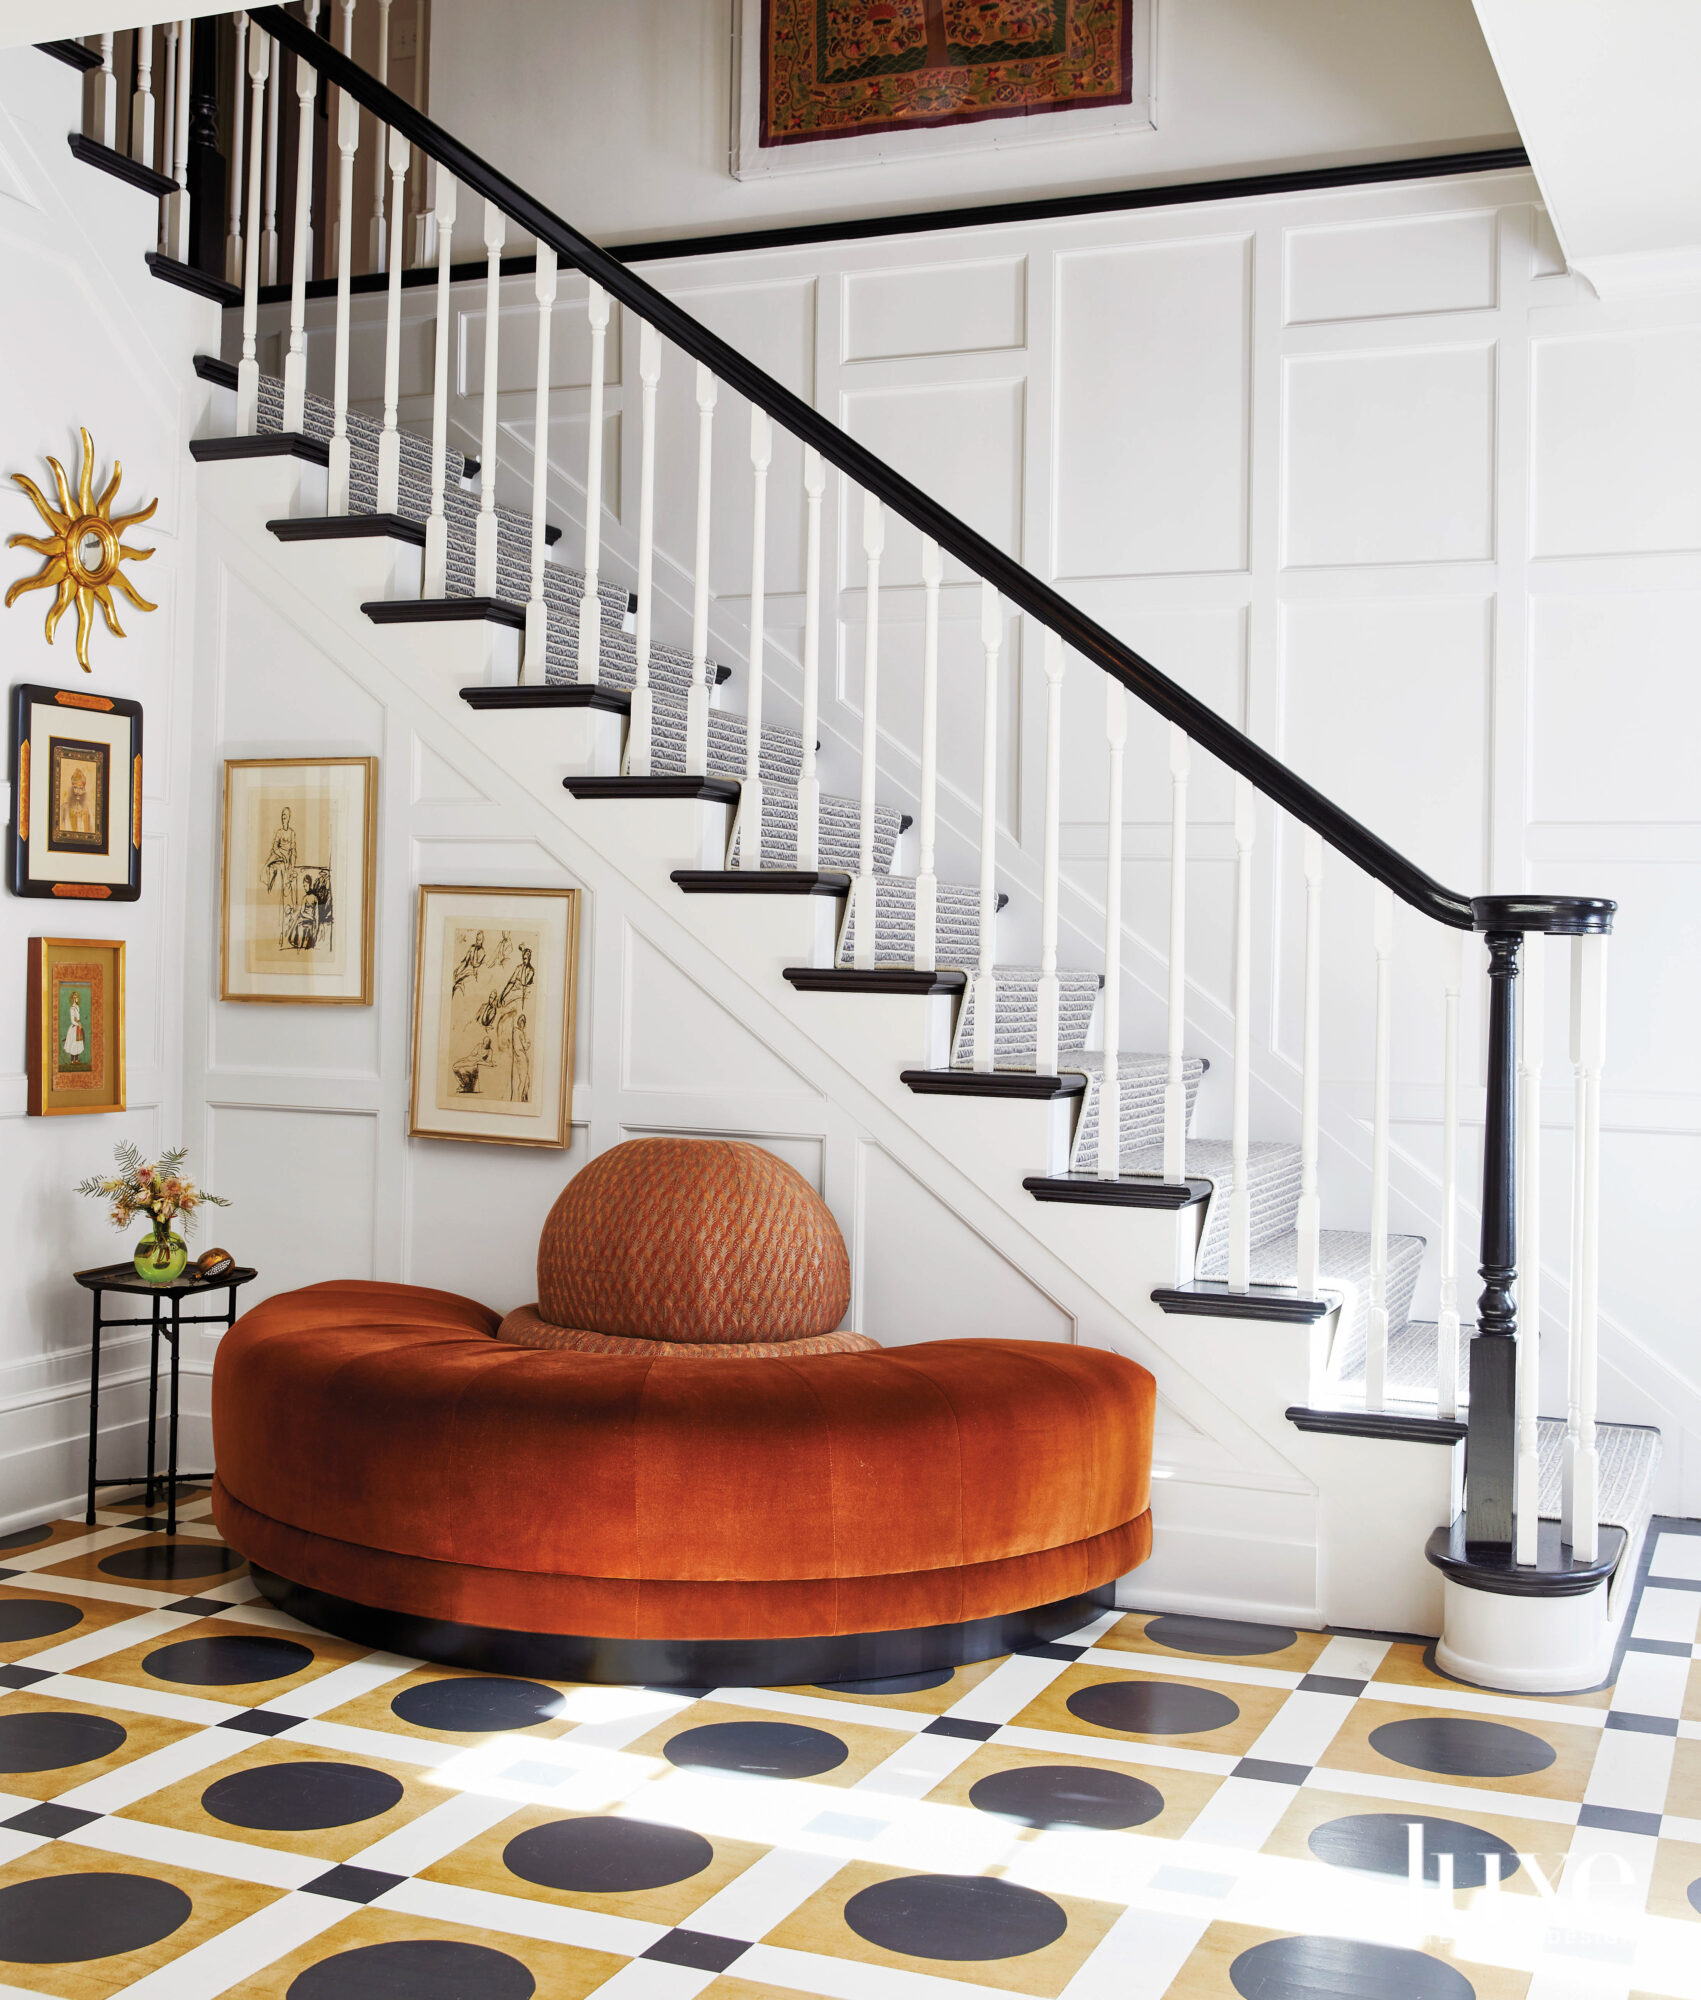 Dramatic stairwell with painted black-and-white floors, rust-colored semicircular bench and paneled walls